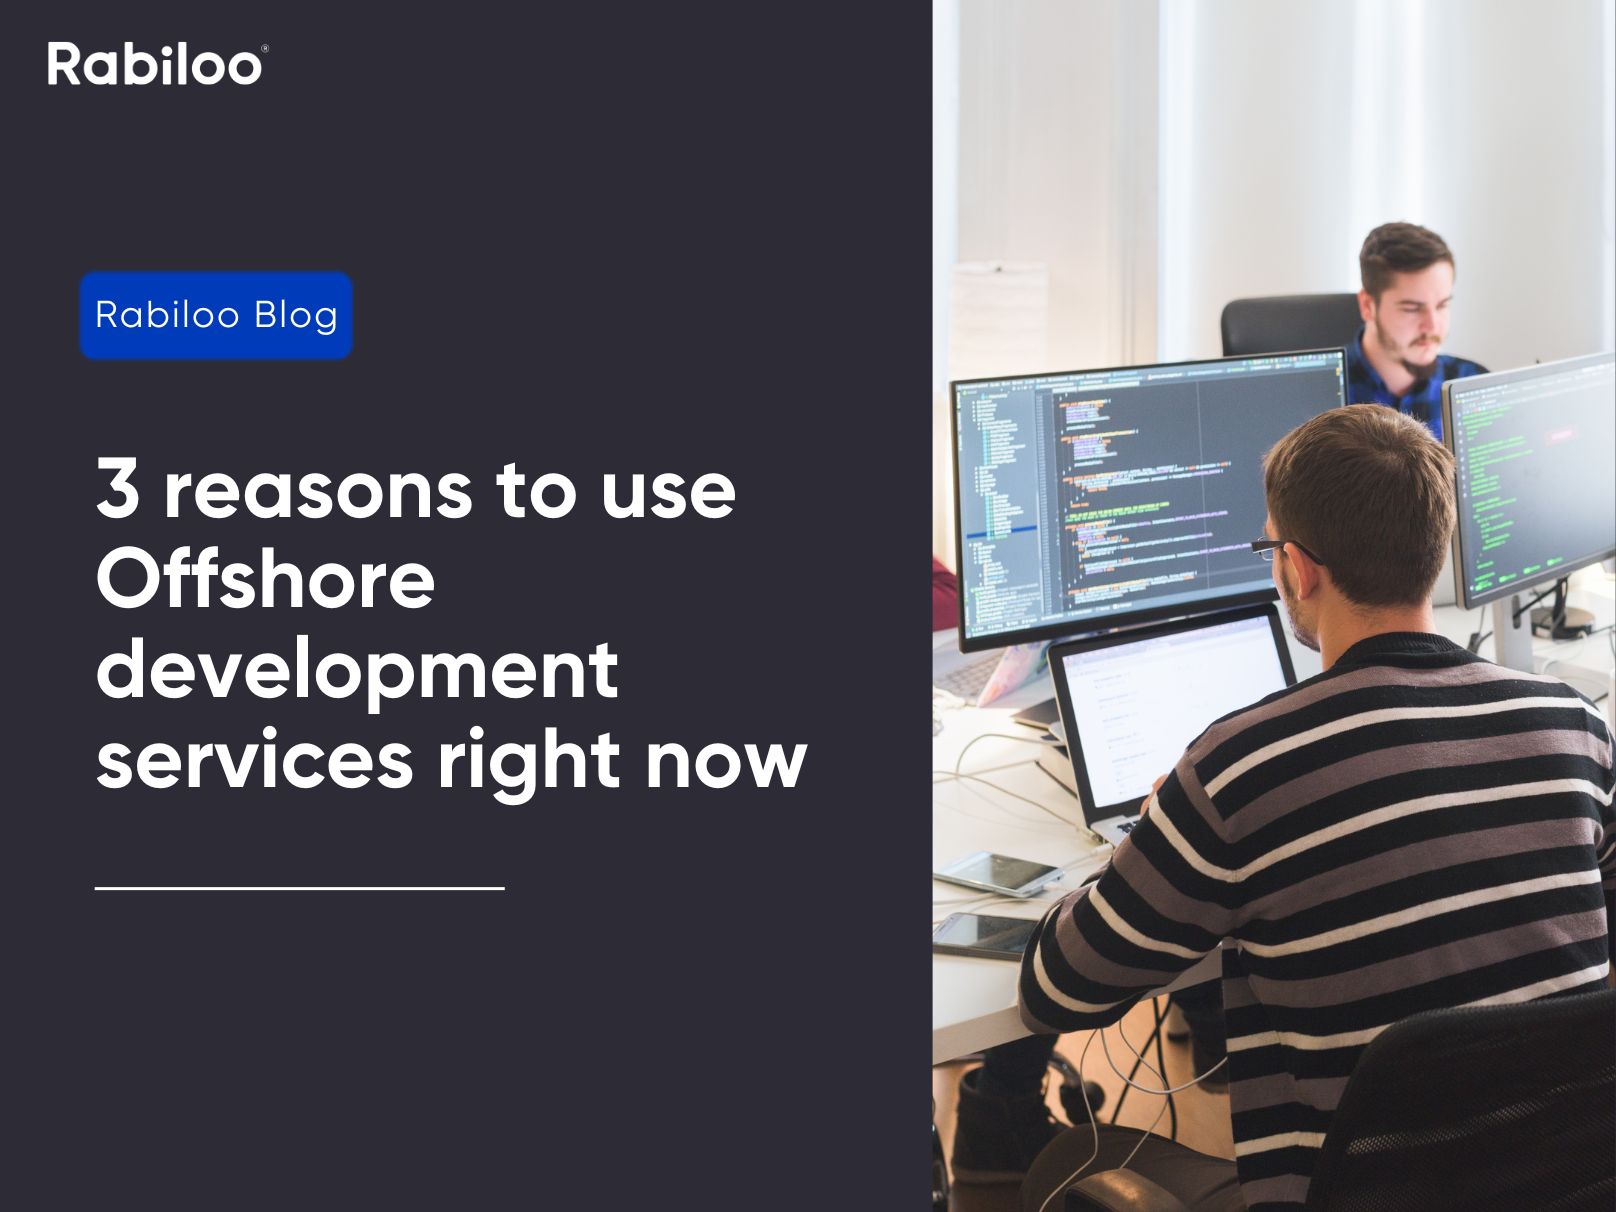 3 reasons to use Offshore development services right now